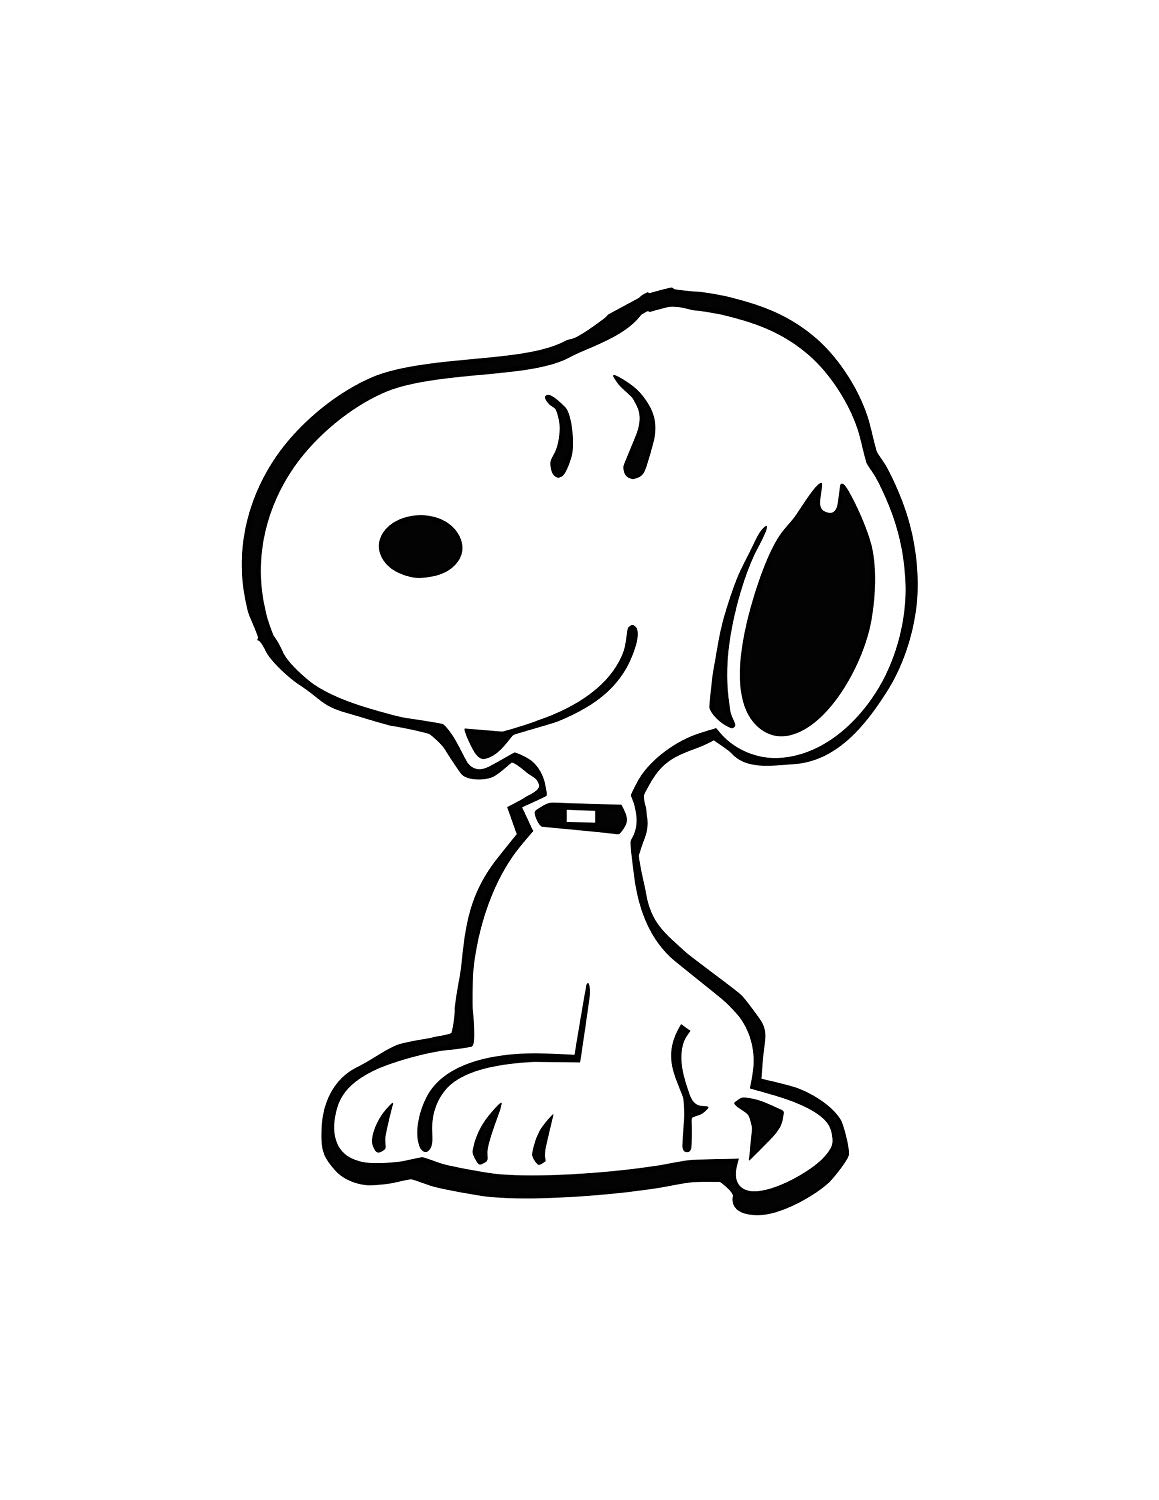 Snoopy And Woodstock Coloring Pages Woodstock Snoopy Coloring Pages